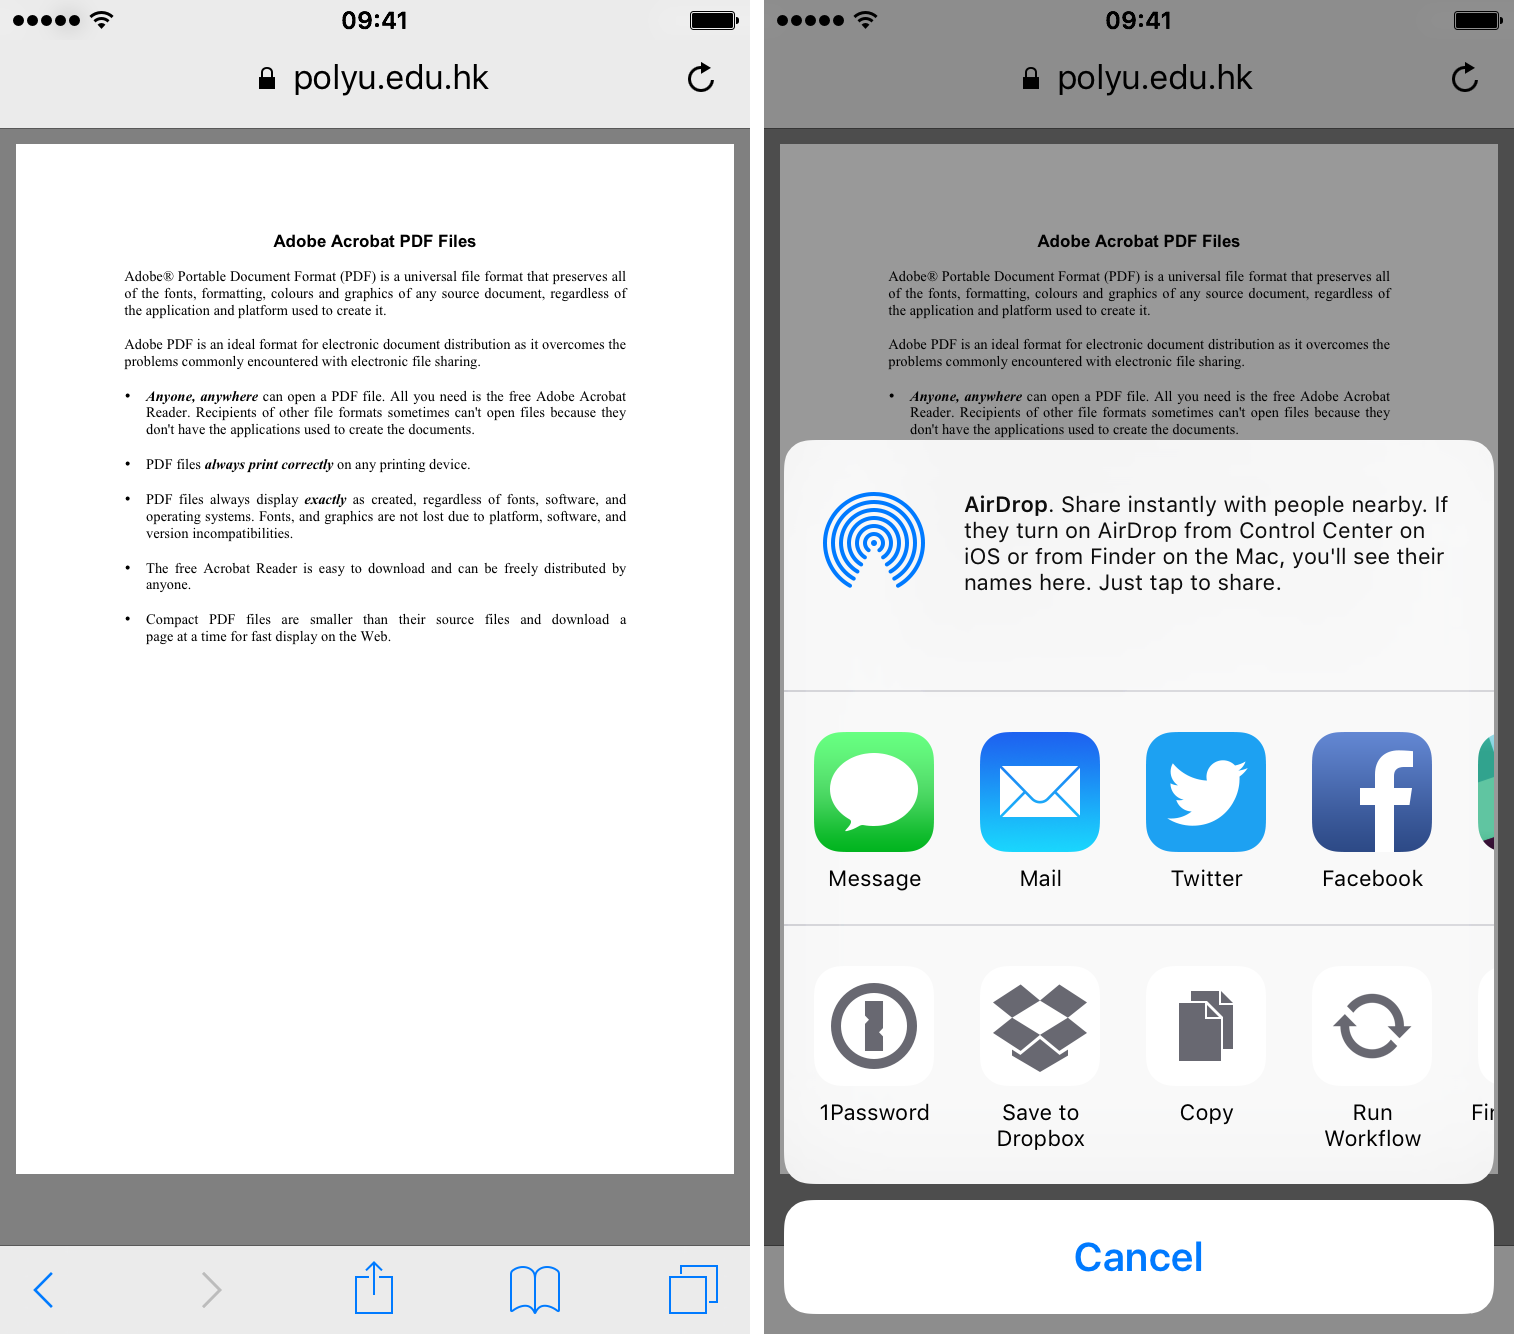 How to download files and documents to iPhone or iPad